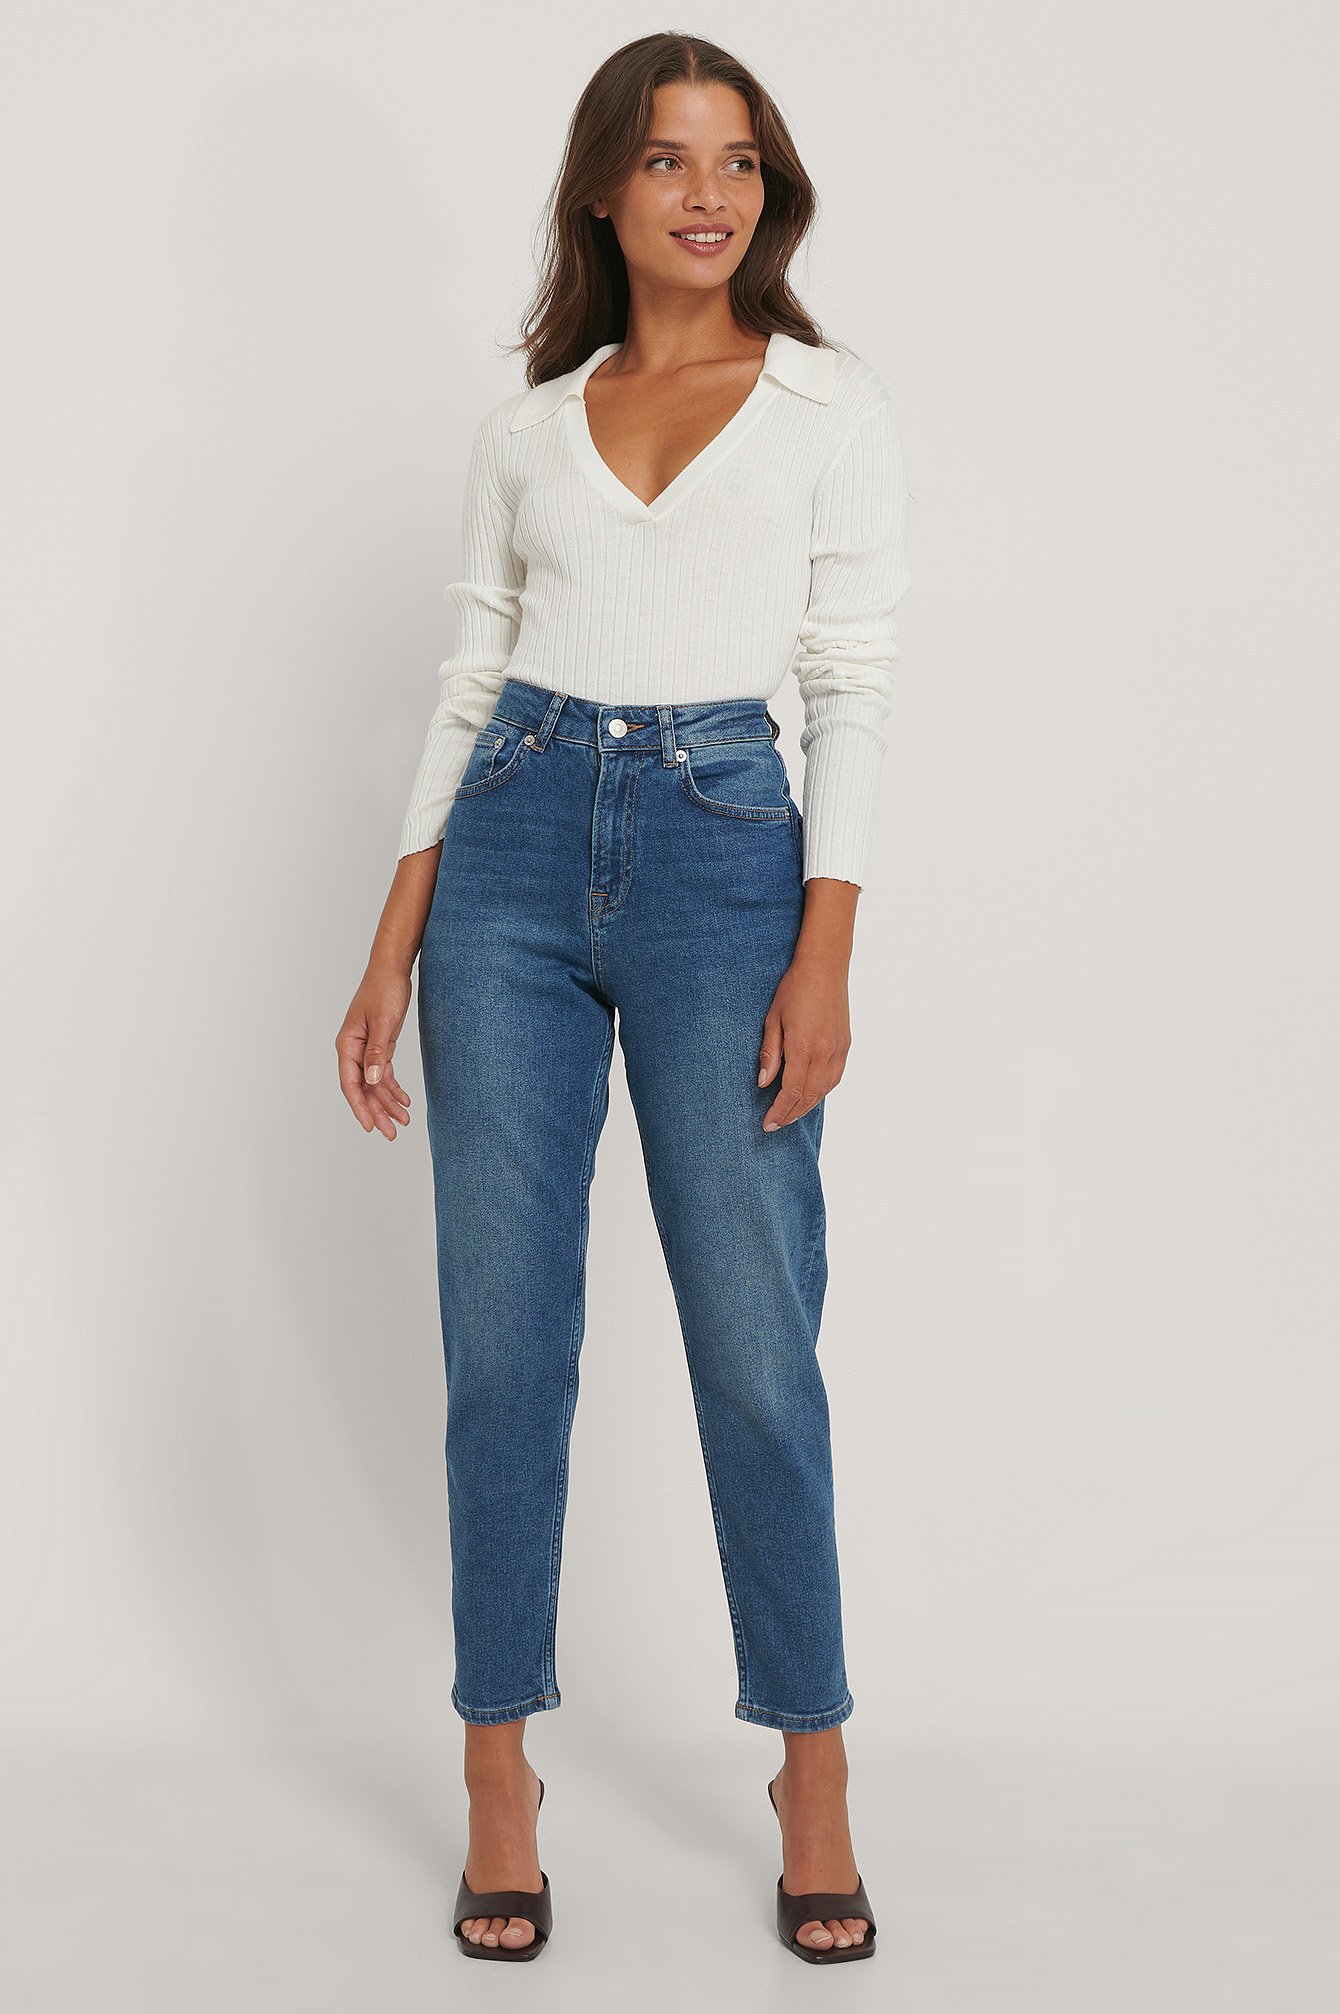 25 Ideas How To Wear Mom Jeans Complete Style Guide 2020 | Mom jeans, Mom  jeans outfit winter, Chic mom outfits